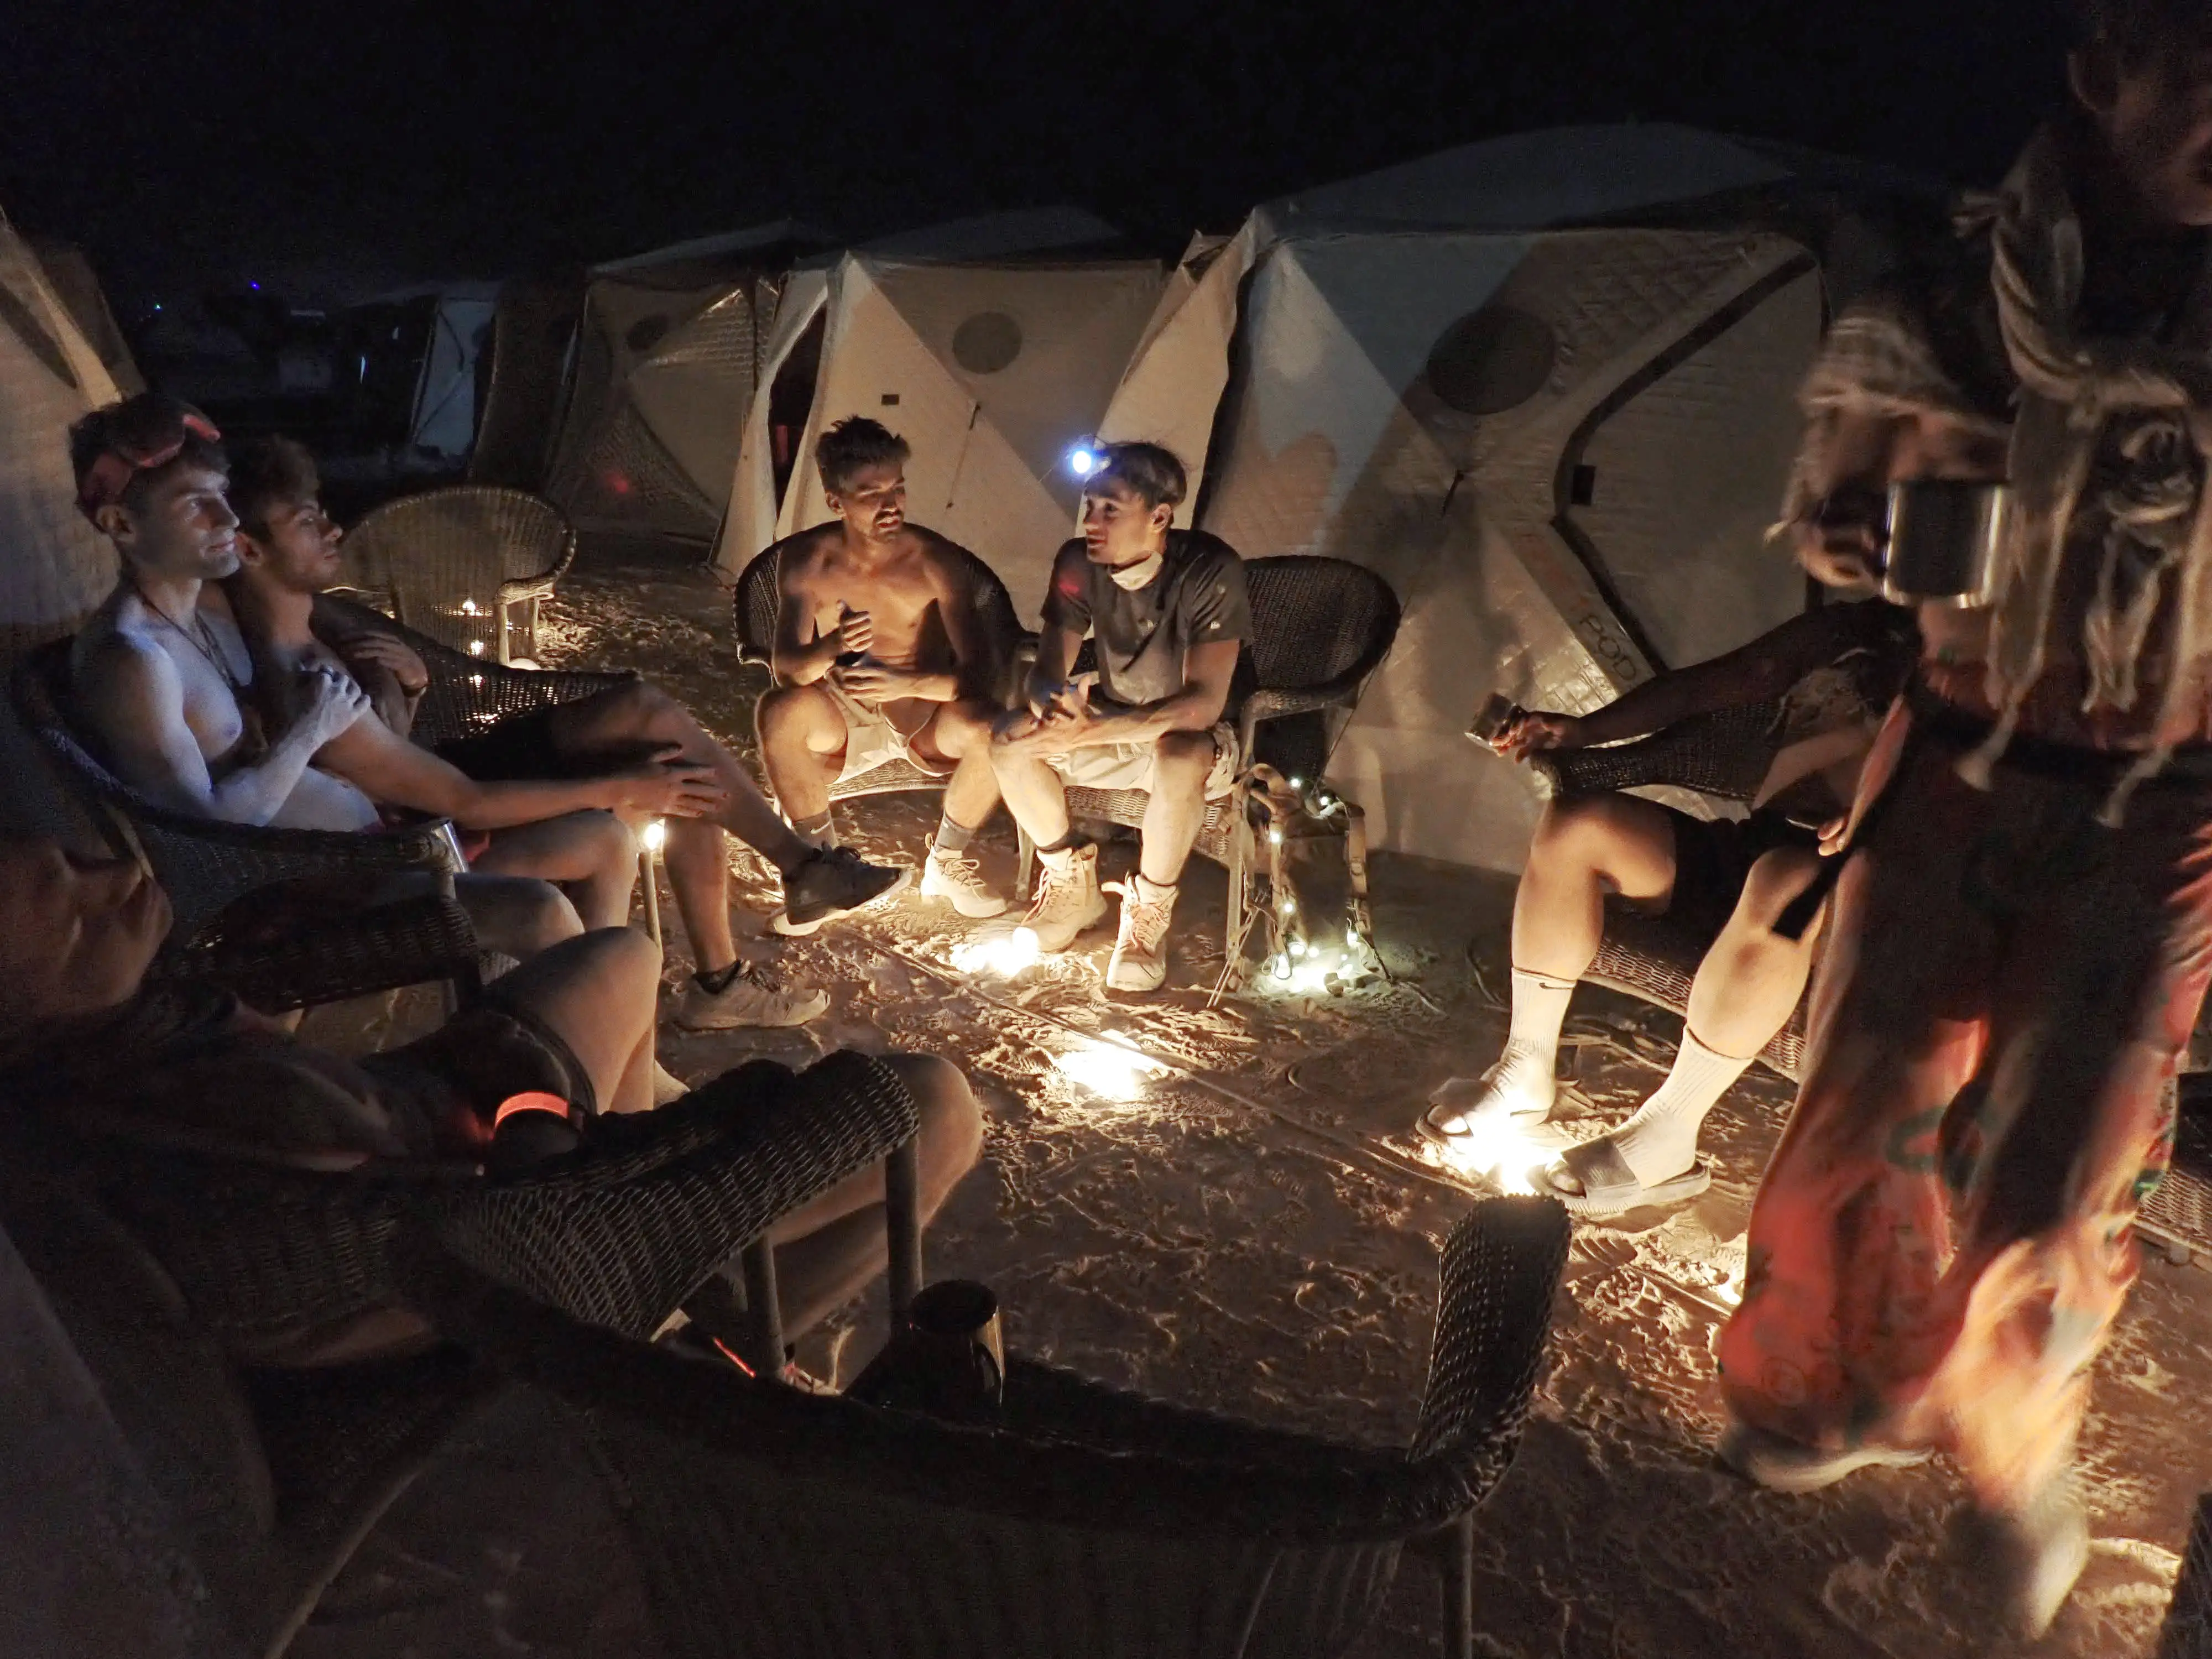 Seven people sit around on wicker chairs at night in the desert at Burning Man. One is sitting on another's lap, one is sleeping, two are chatting. There are shiftpod tents in the background, and a cozy string of lightbulbs on the desert dirt ground.